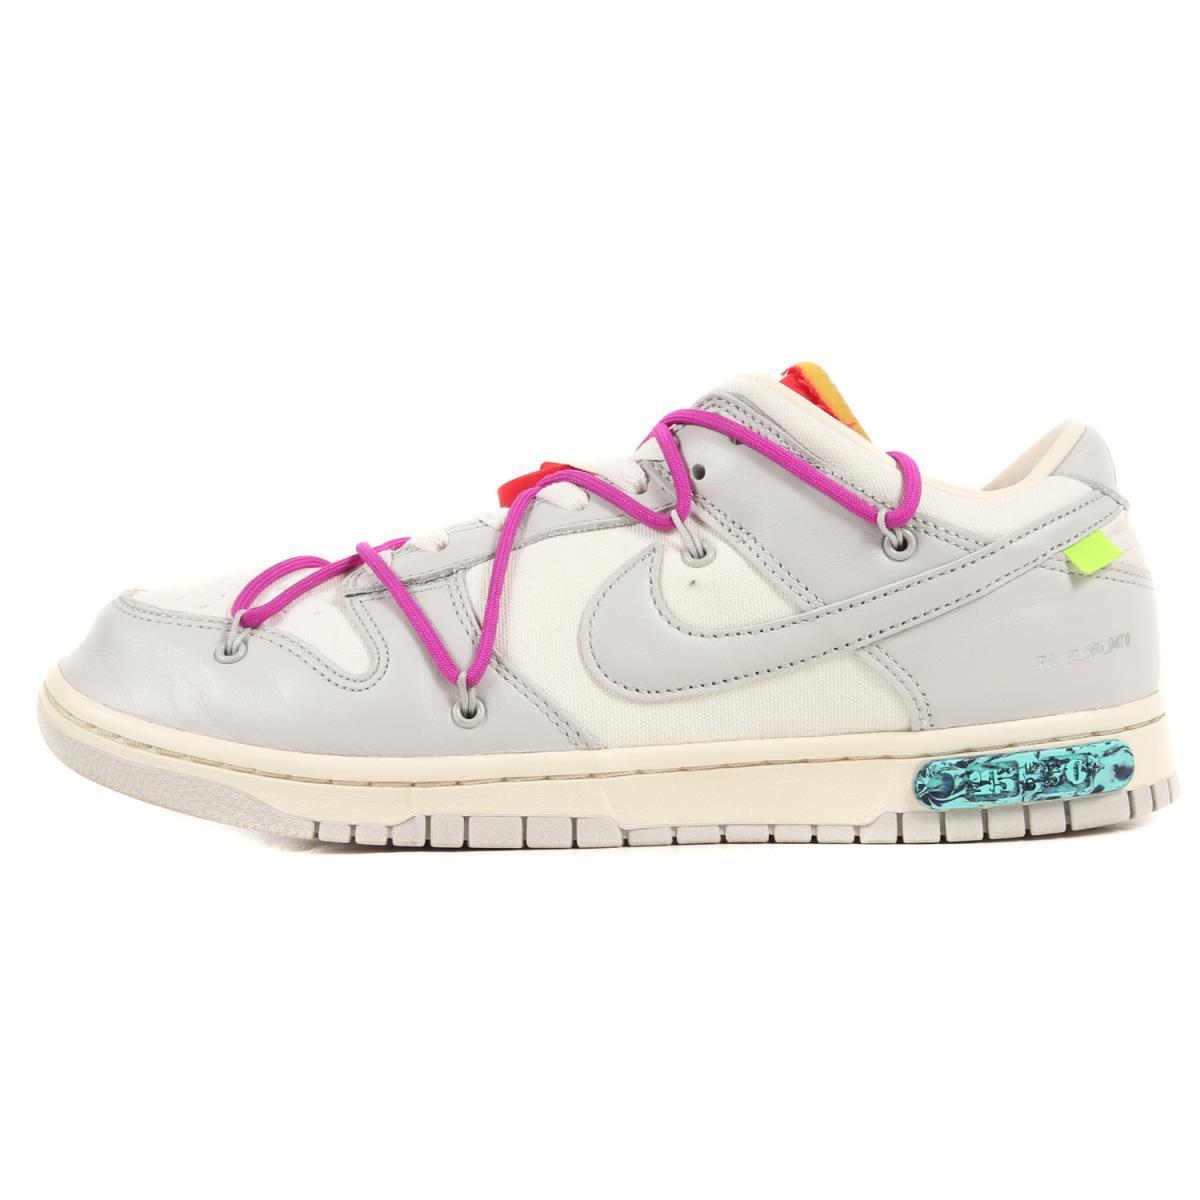 OFF-WHITE オフホワイト NIKE DUNK LOW The 50 / 1 OF 50 No.45 (DM1602-101) 21AW ナイキ ダンク ロー セイル レー US11(29cm)